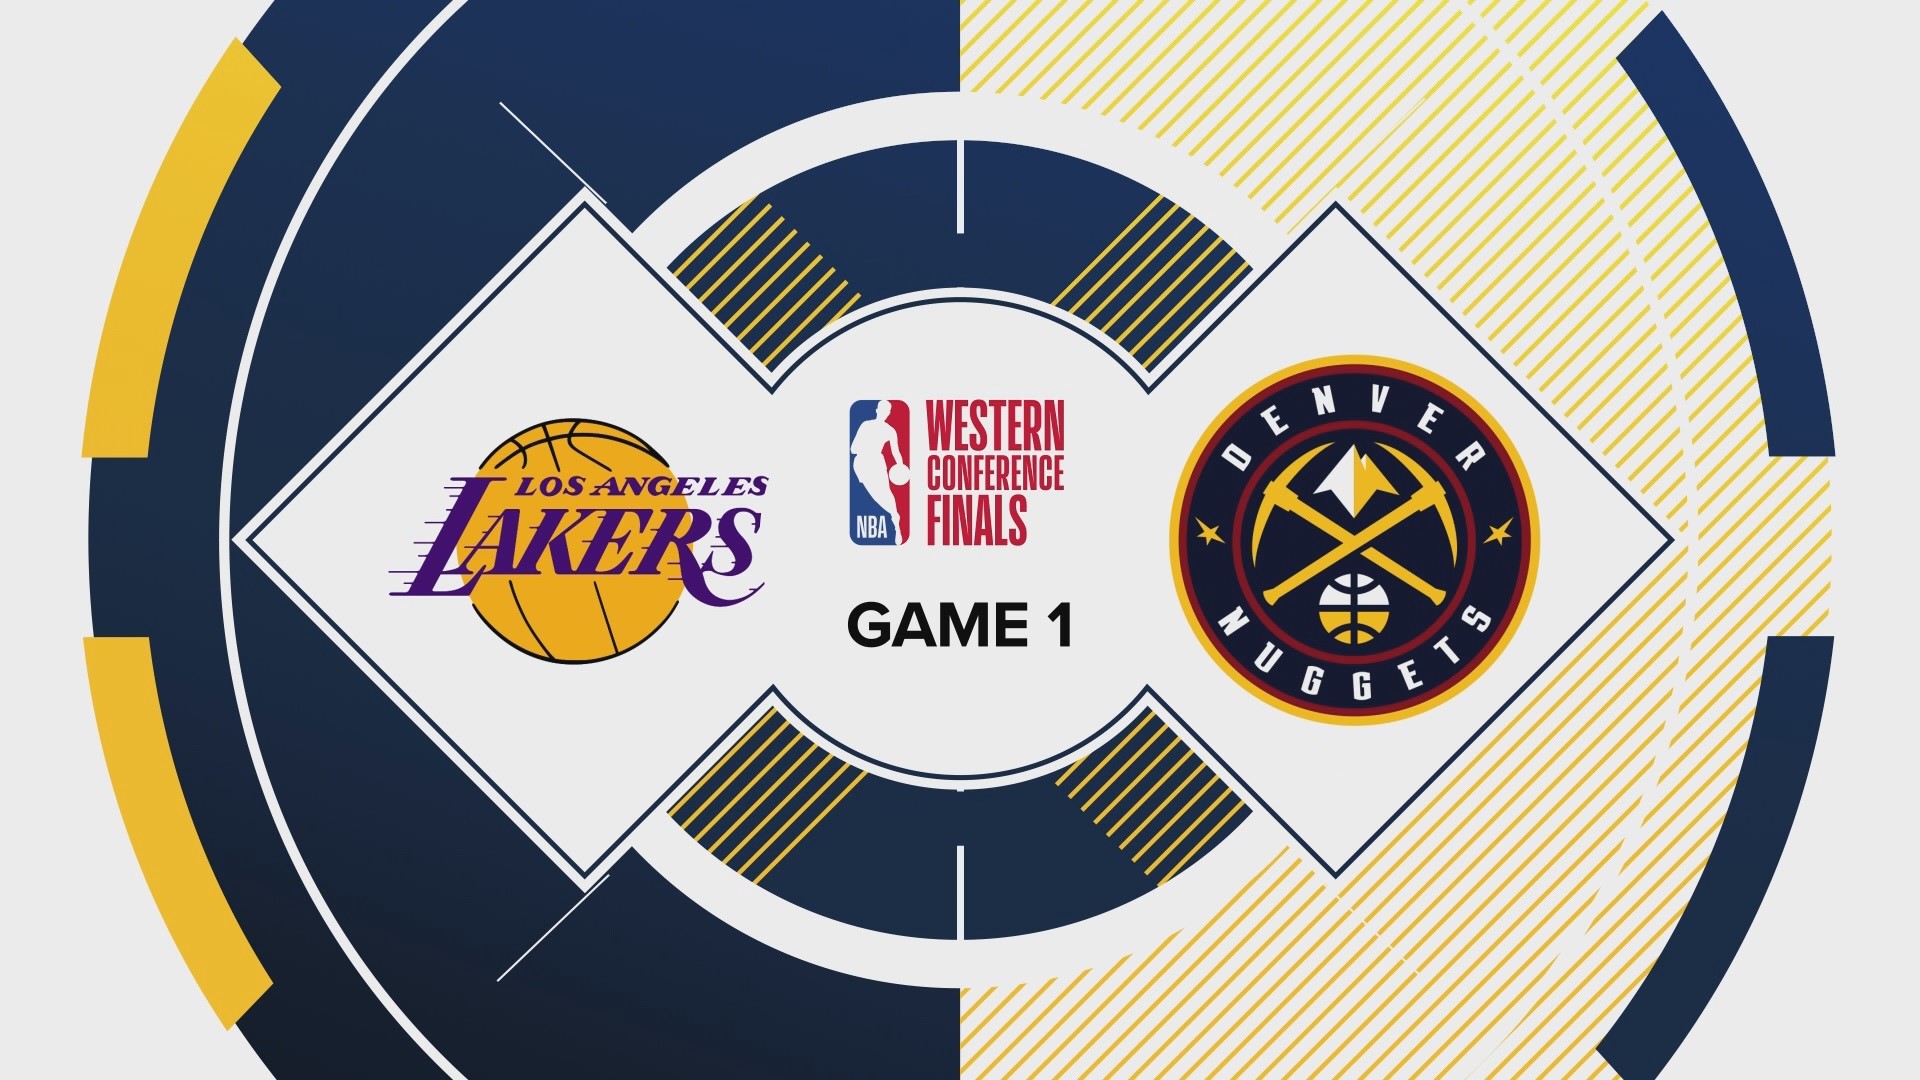 Denver and Los Angeles kick off the third round of the NBA playoffs at Ball Arena on Tuesday night.